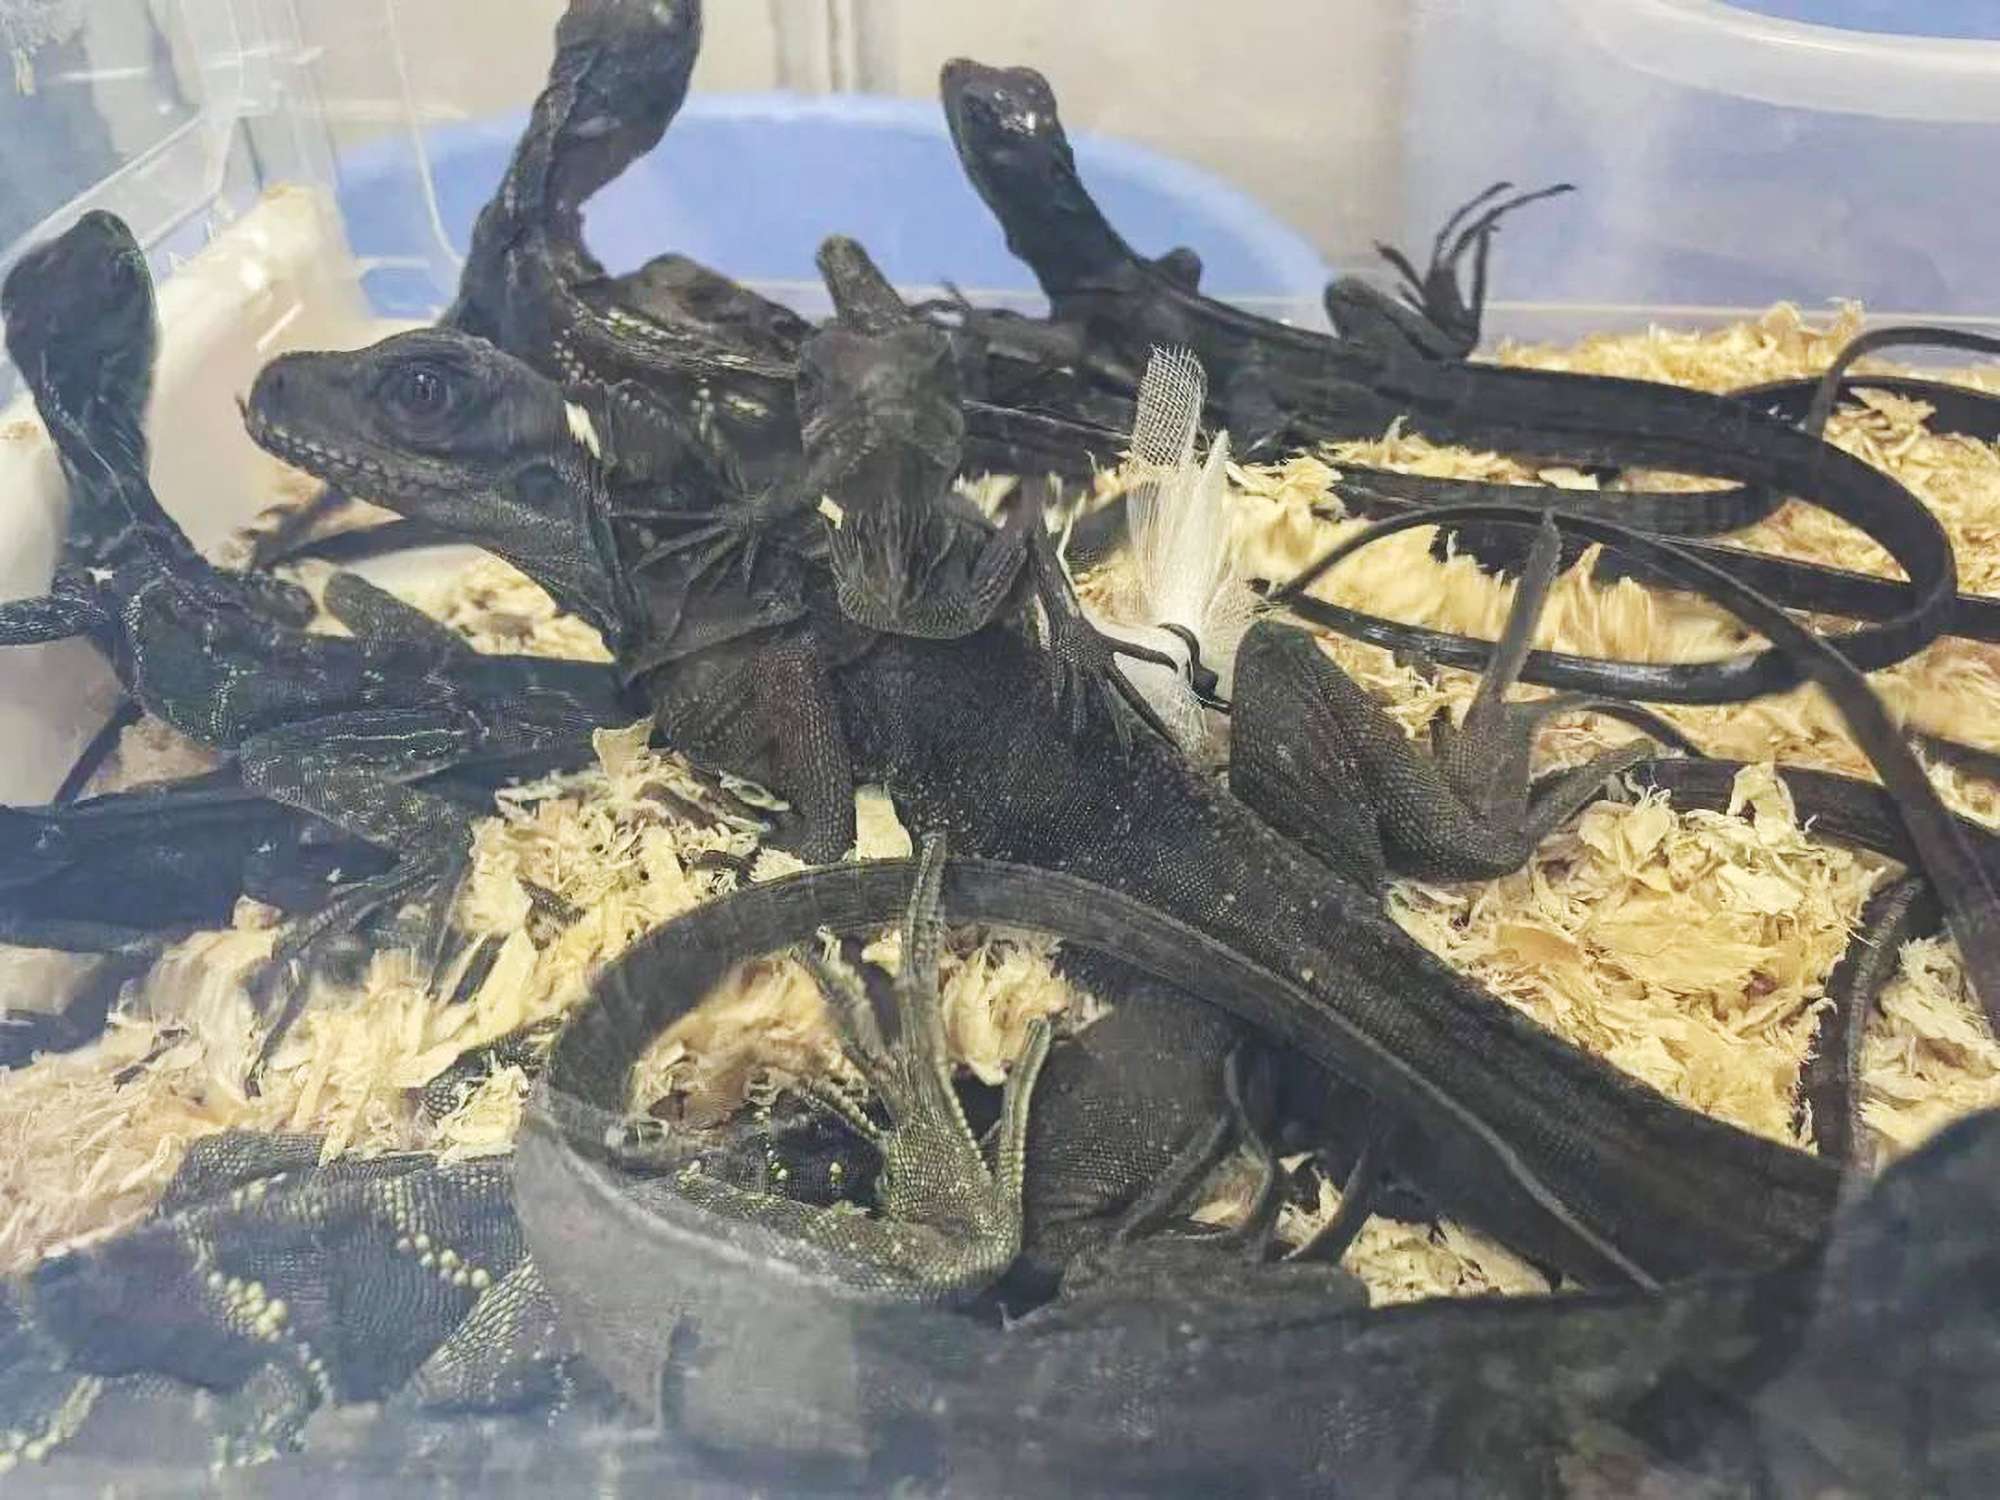 Woman Caught Smuggling 16 Young Lizards In Her Bra